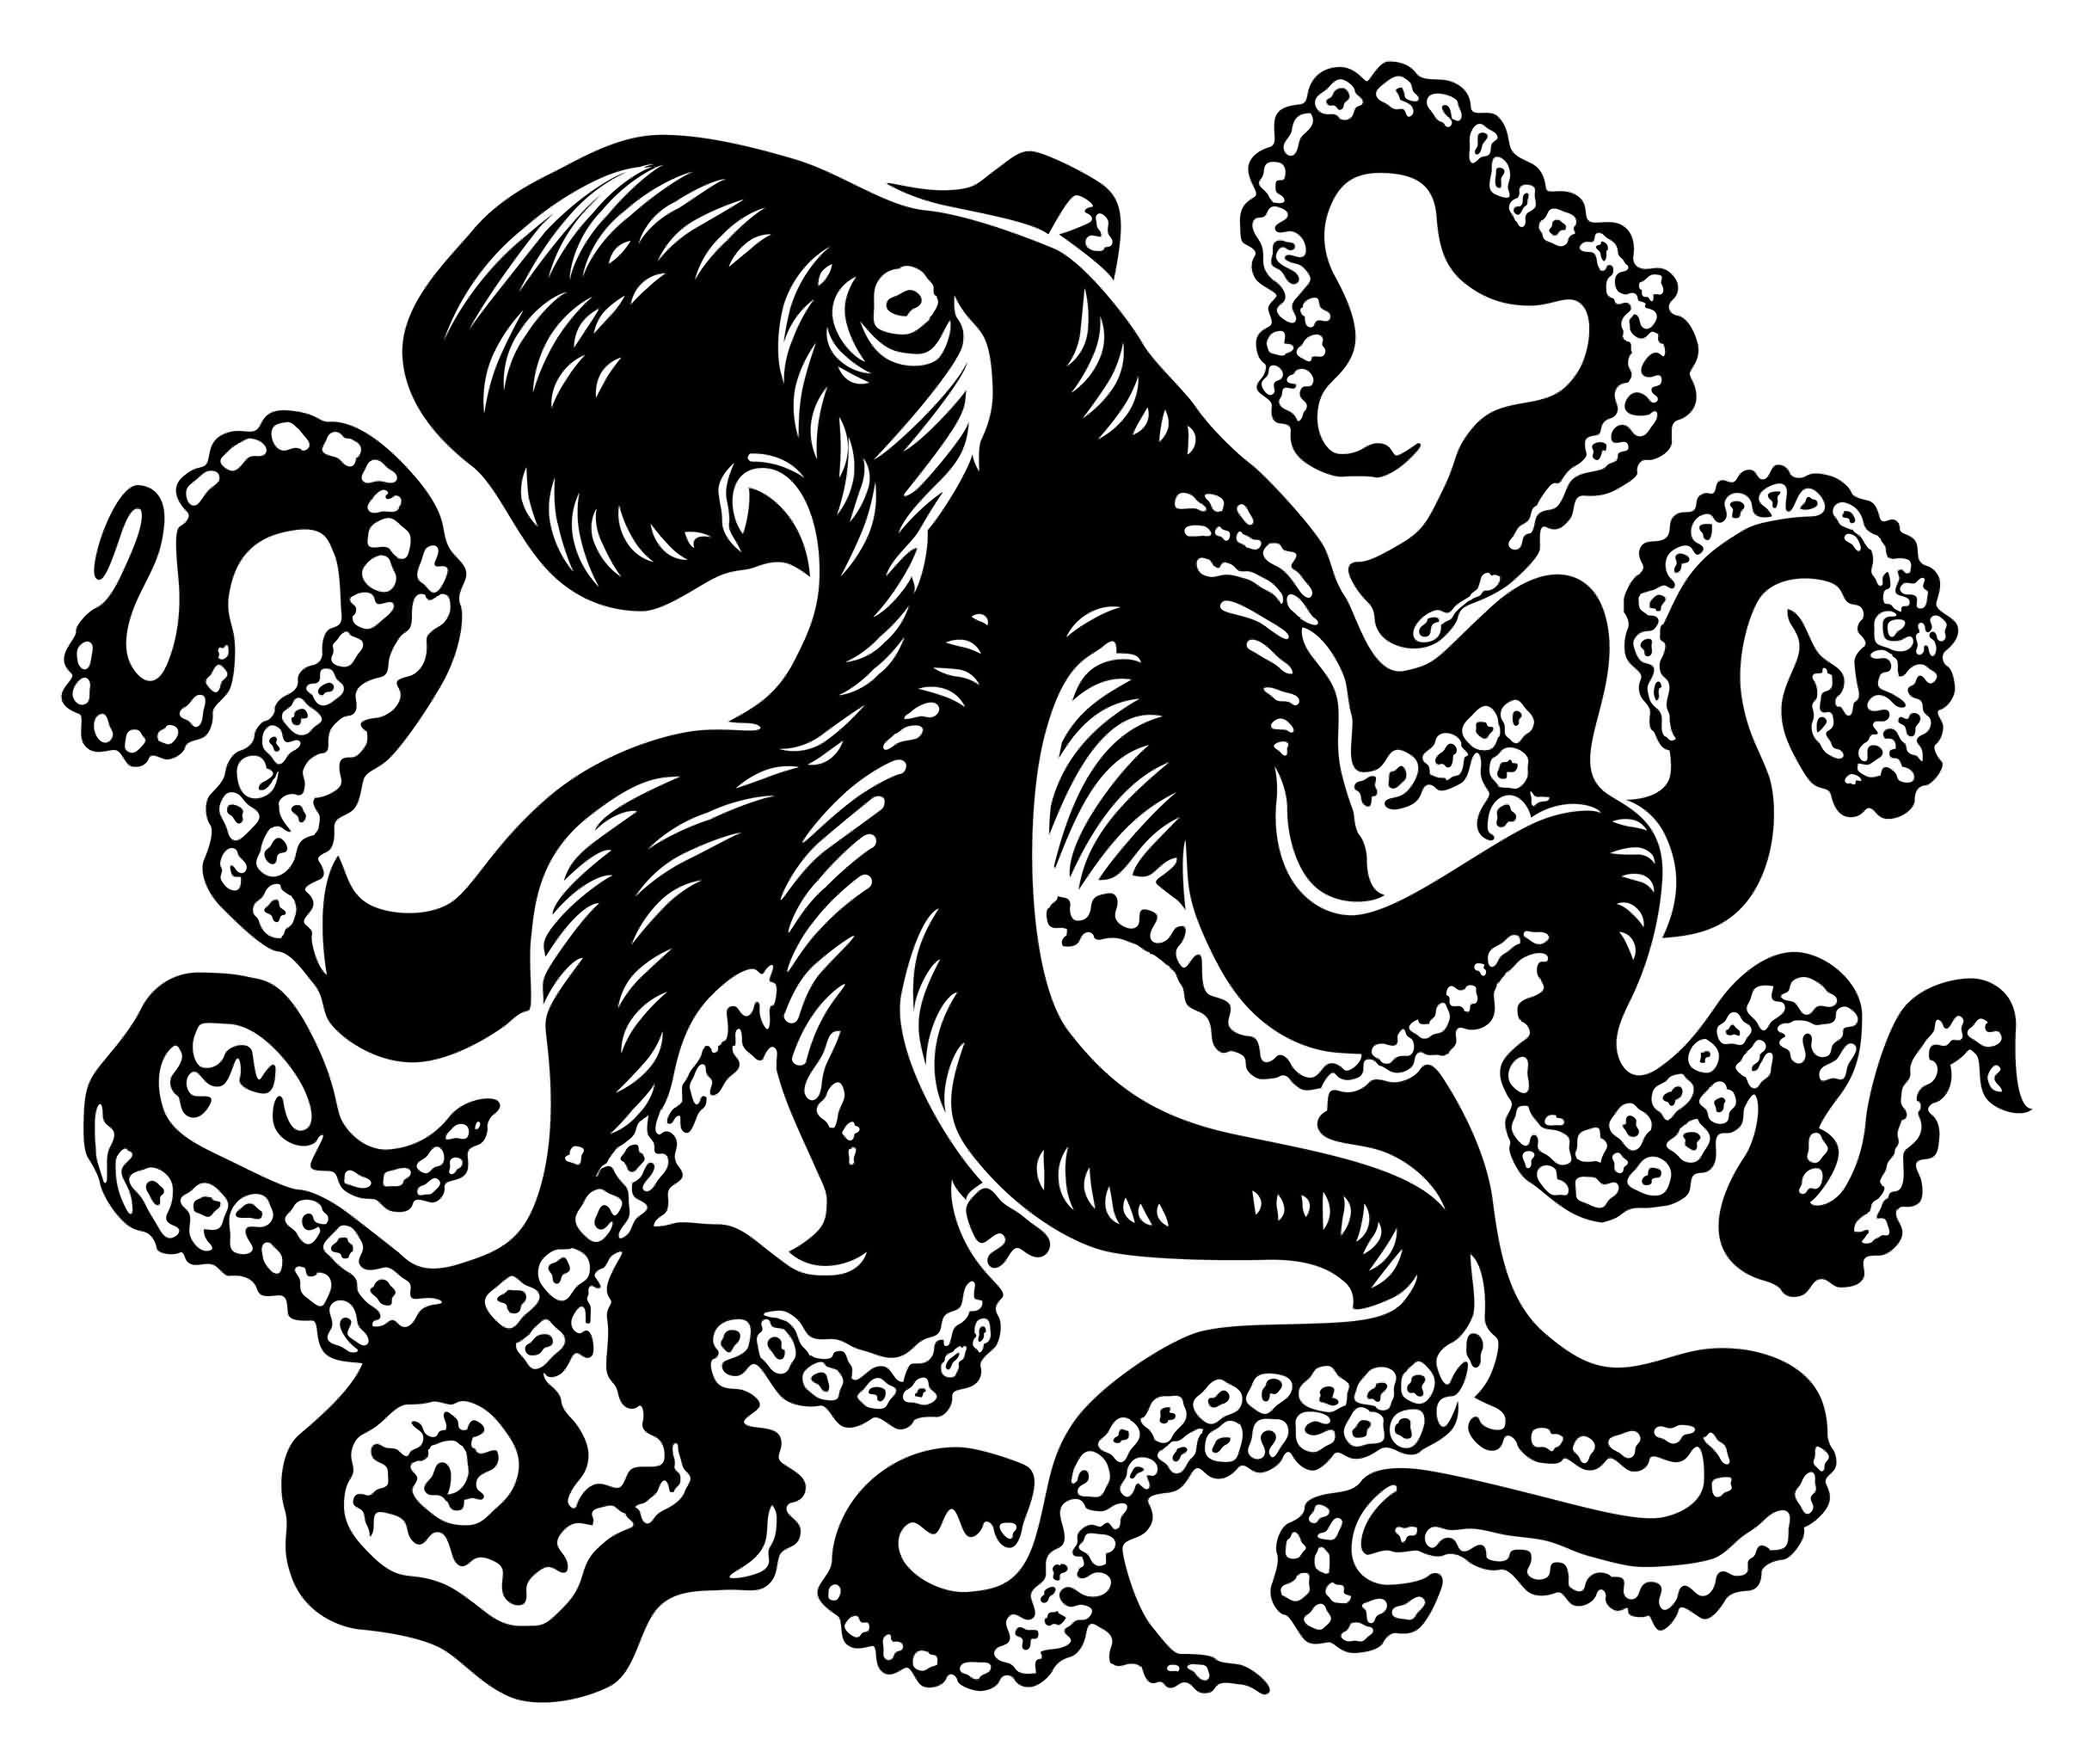 Black octopus with a lot of tentacles tattoo design